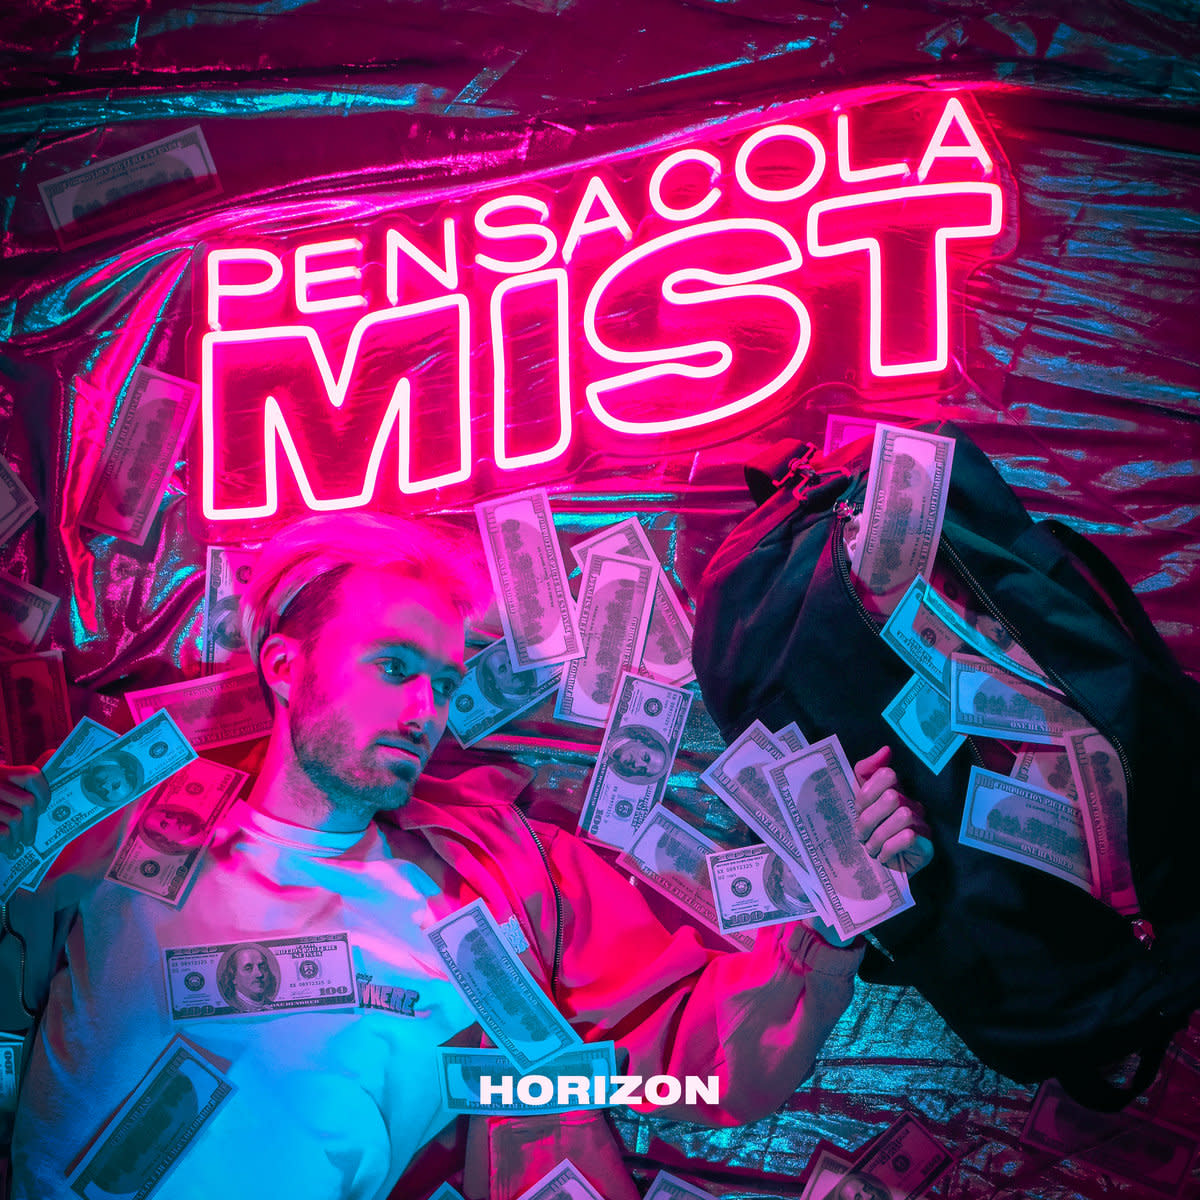 synthpop-single-review-horizon-by-pensacola-mist